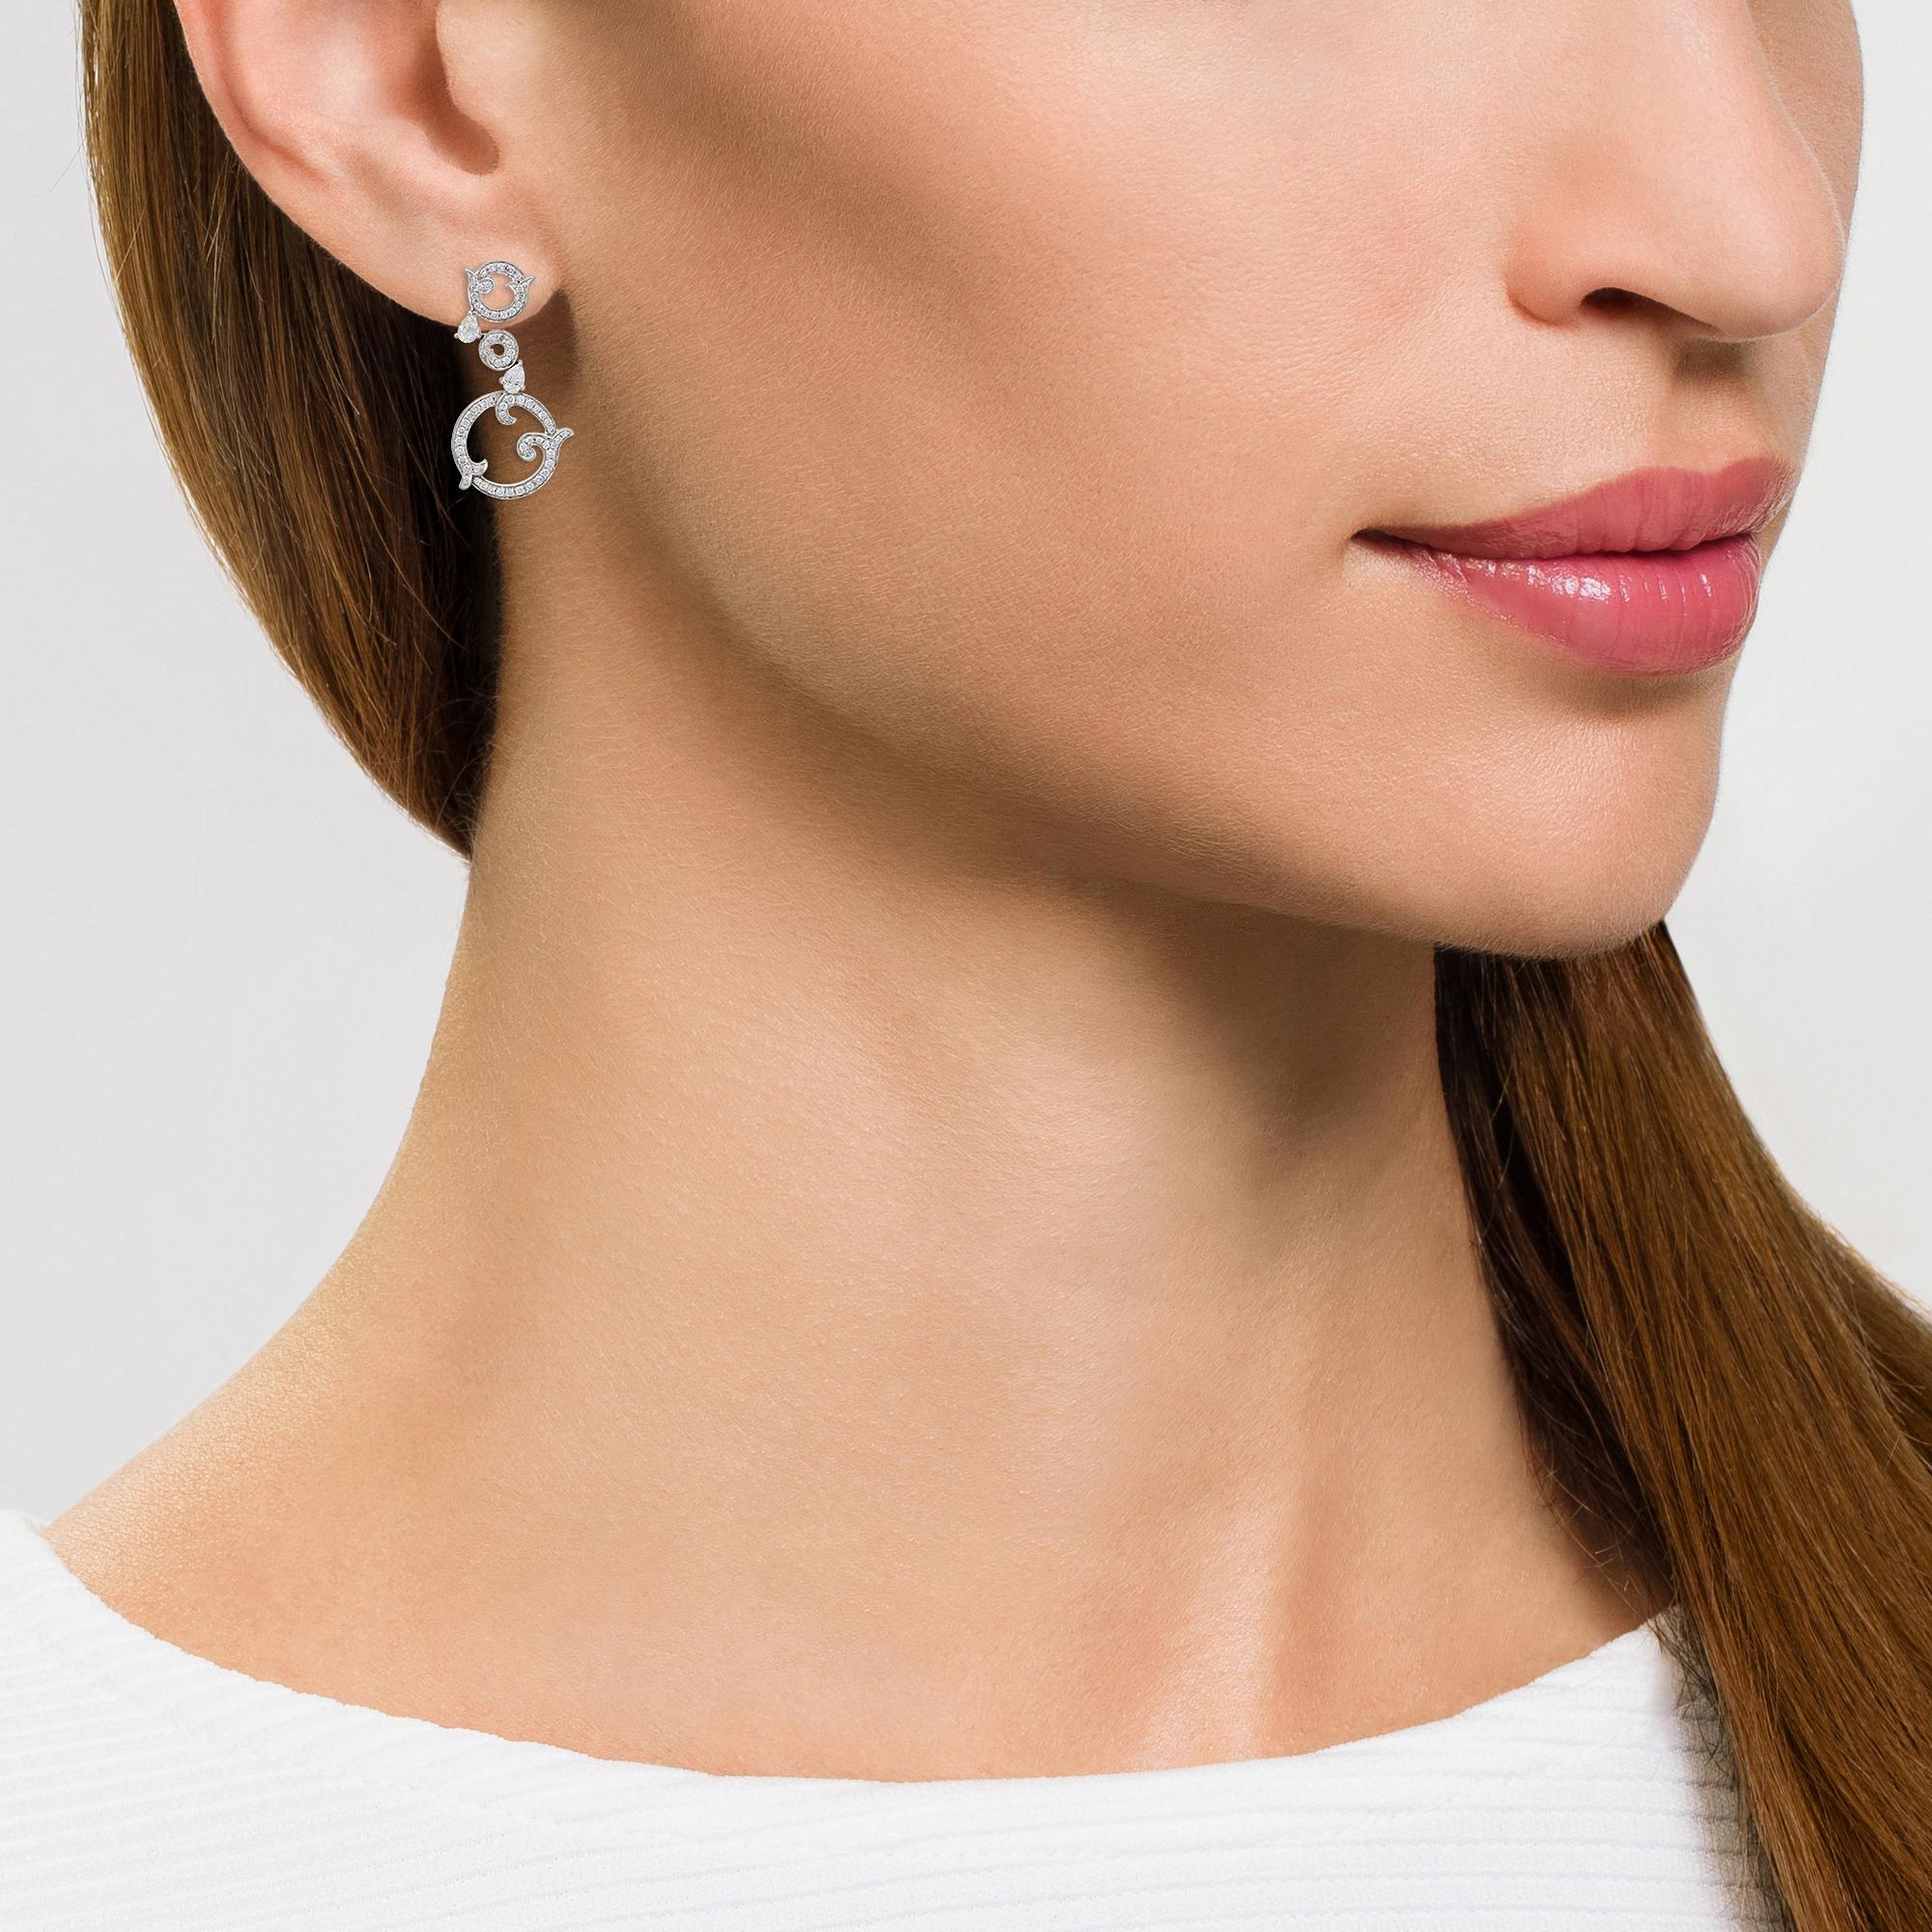 For a contemporary and individual take on white diamond earrings, look to this unique, statement-making swirl design from David Morris. These eye-catching earrings are composed of three diamond-embellished circles with overlapping, vine-like